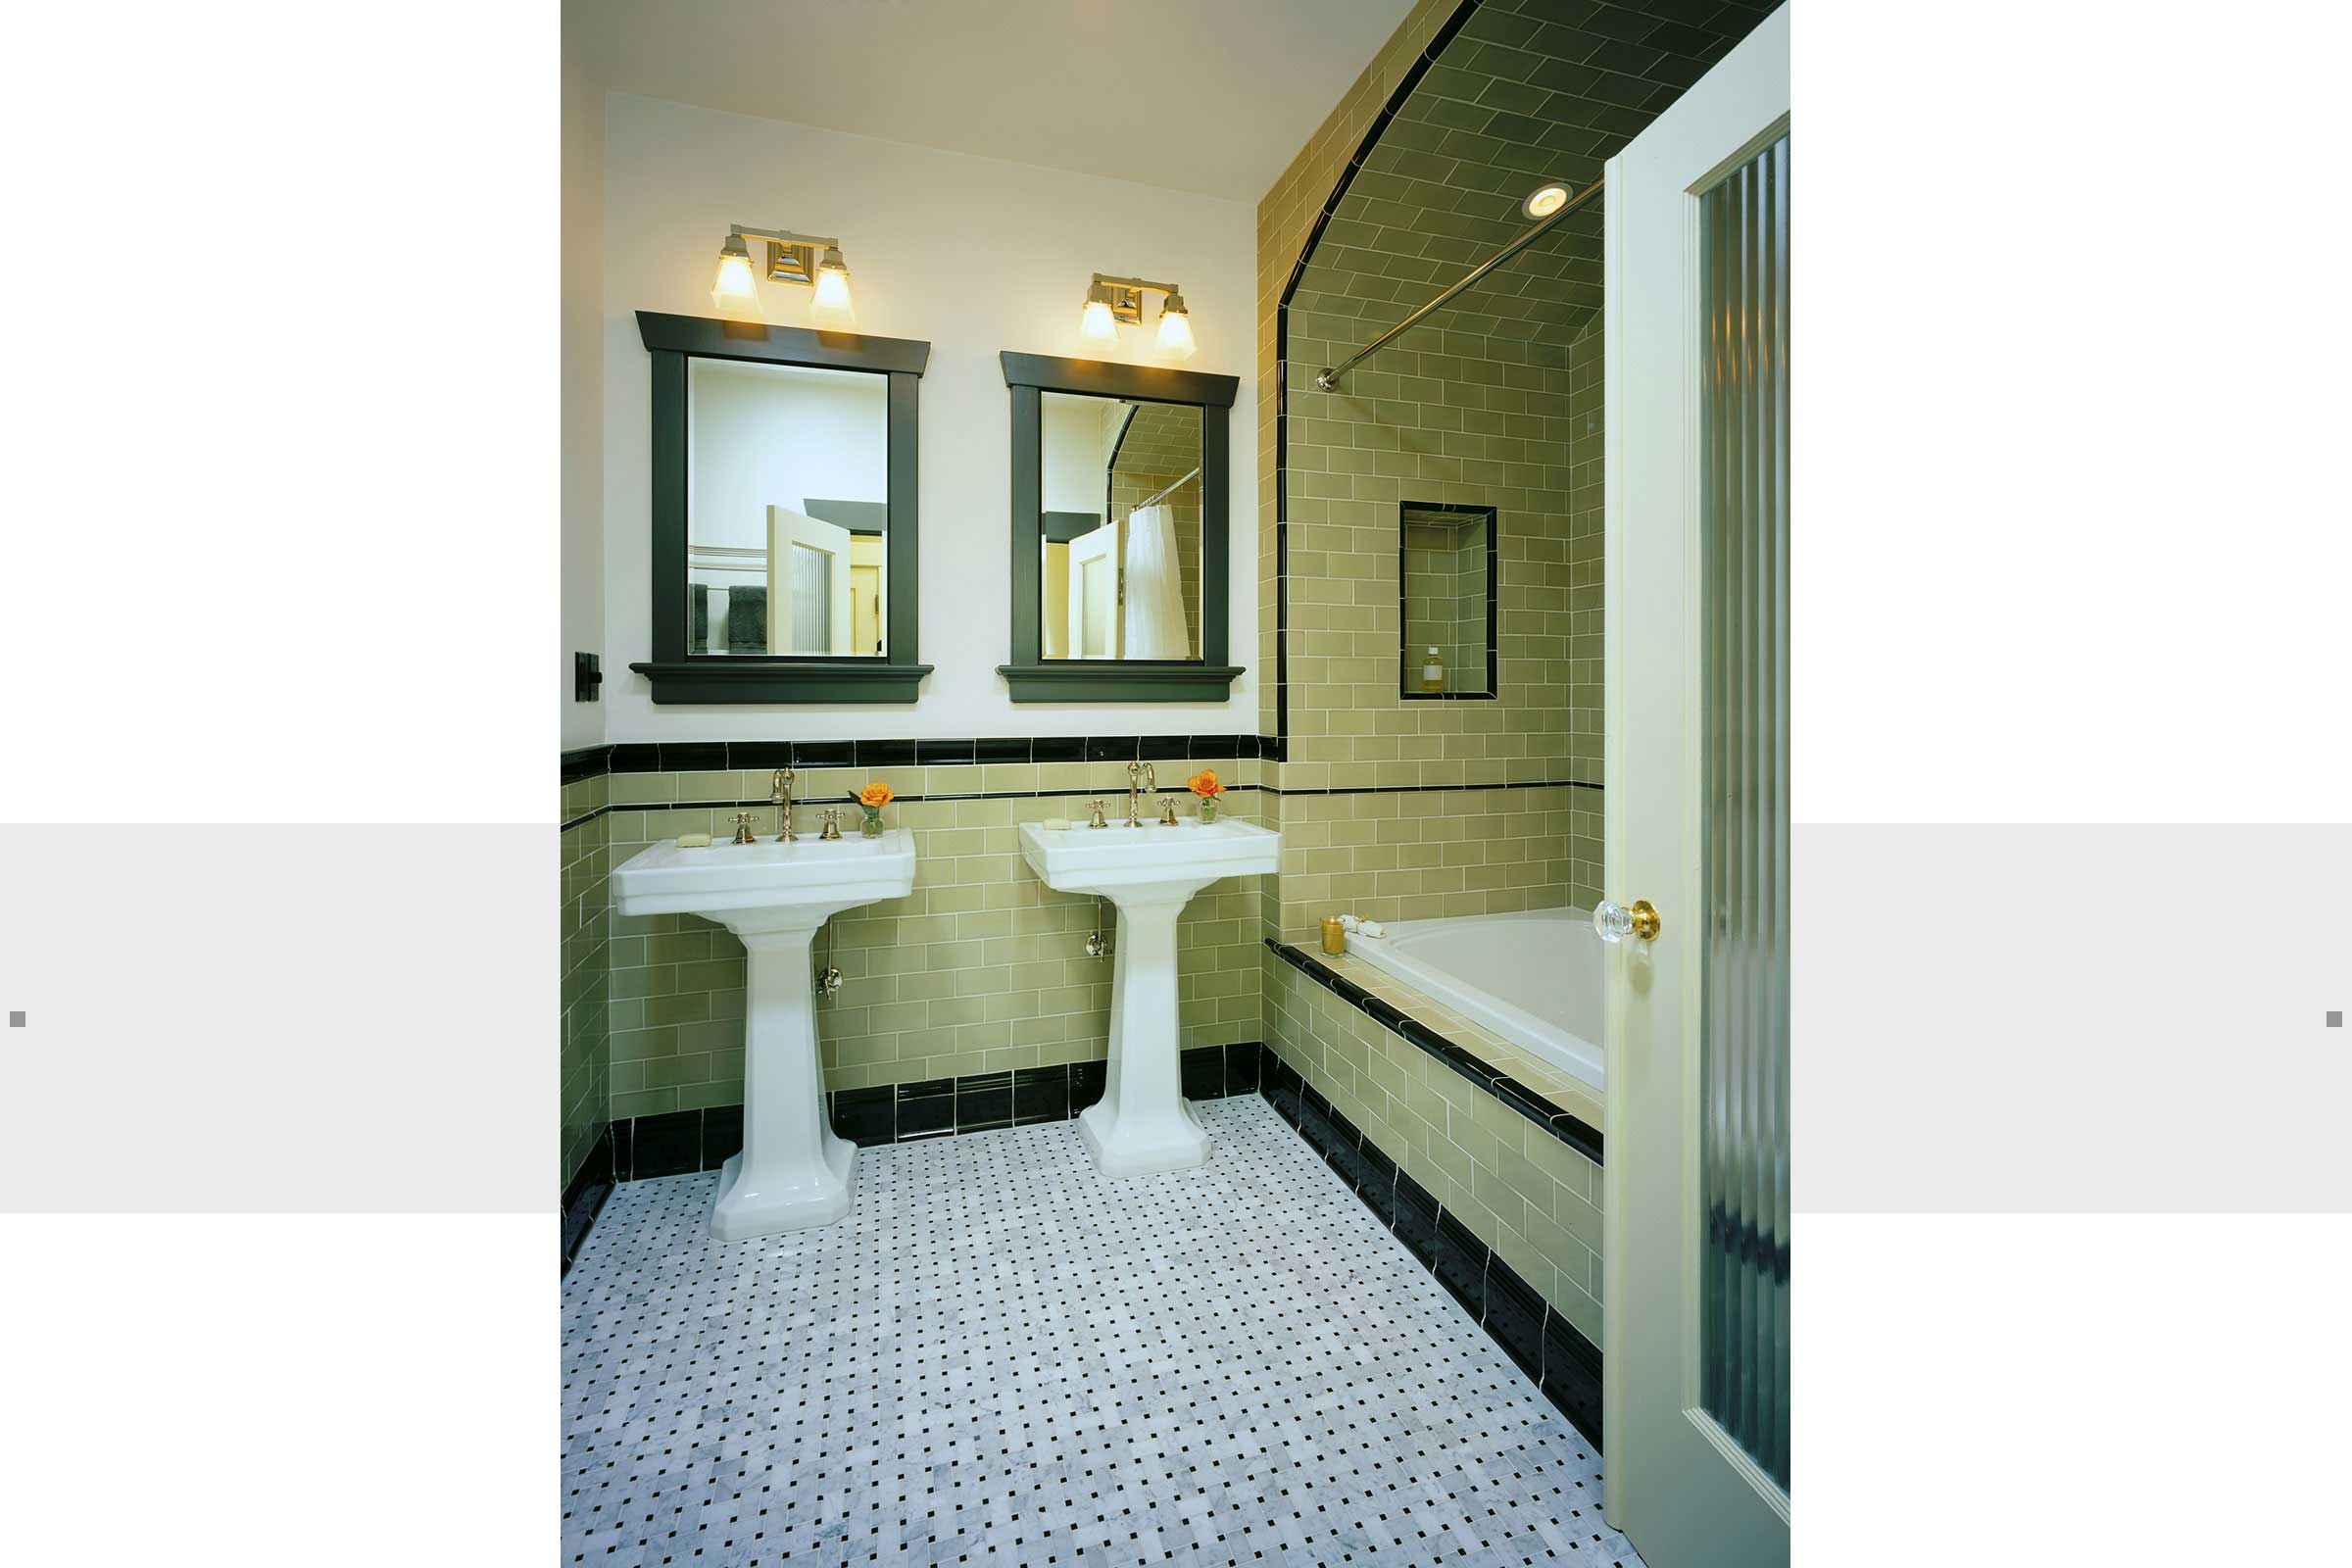 bathroom with pedestal sinks and intricate tile work